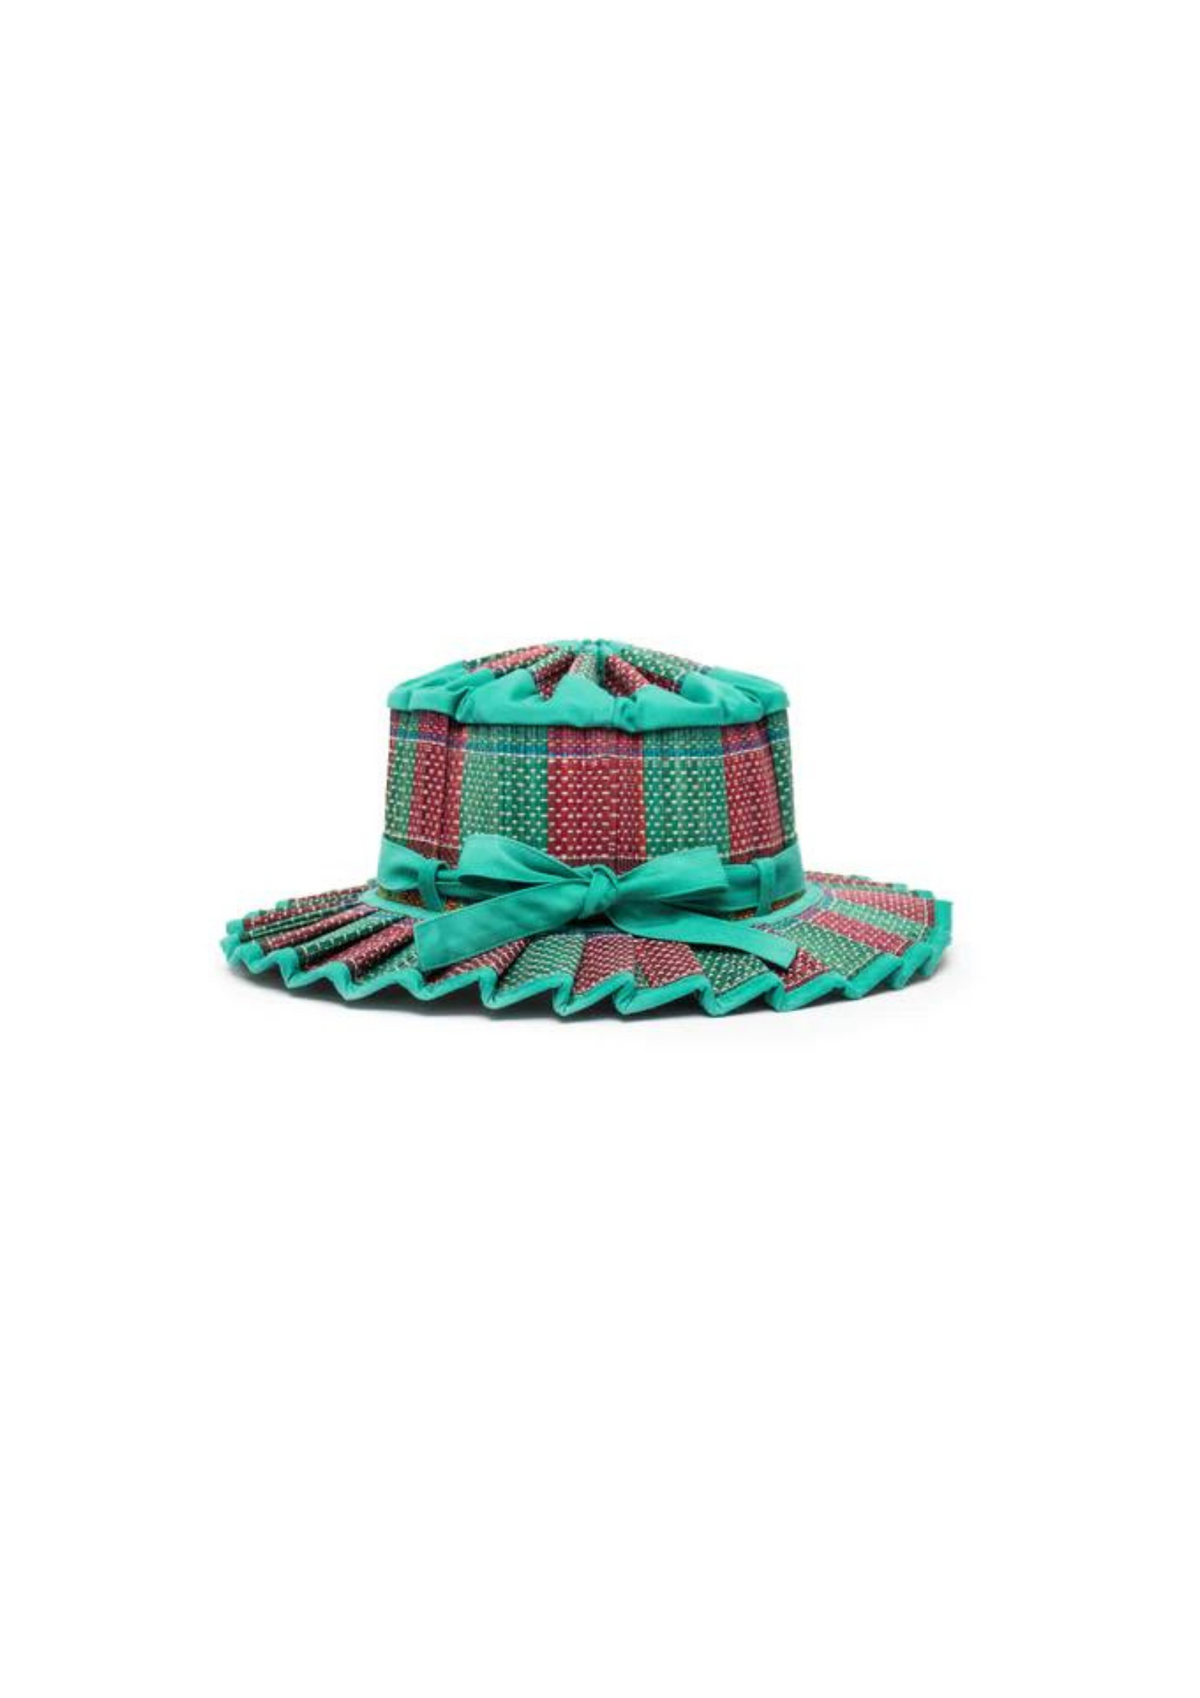 Baja Island Mayfair - Child Hat size large or adult size small ...